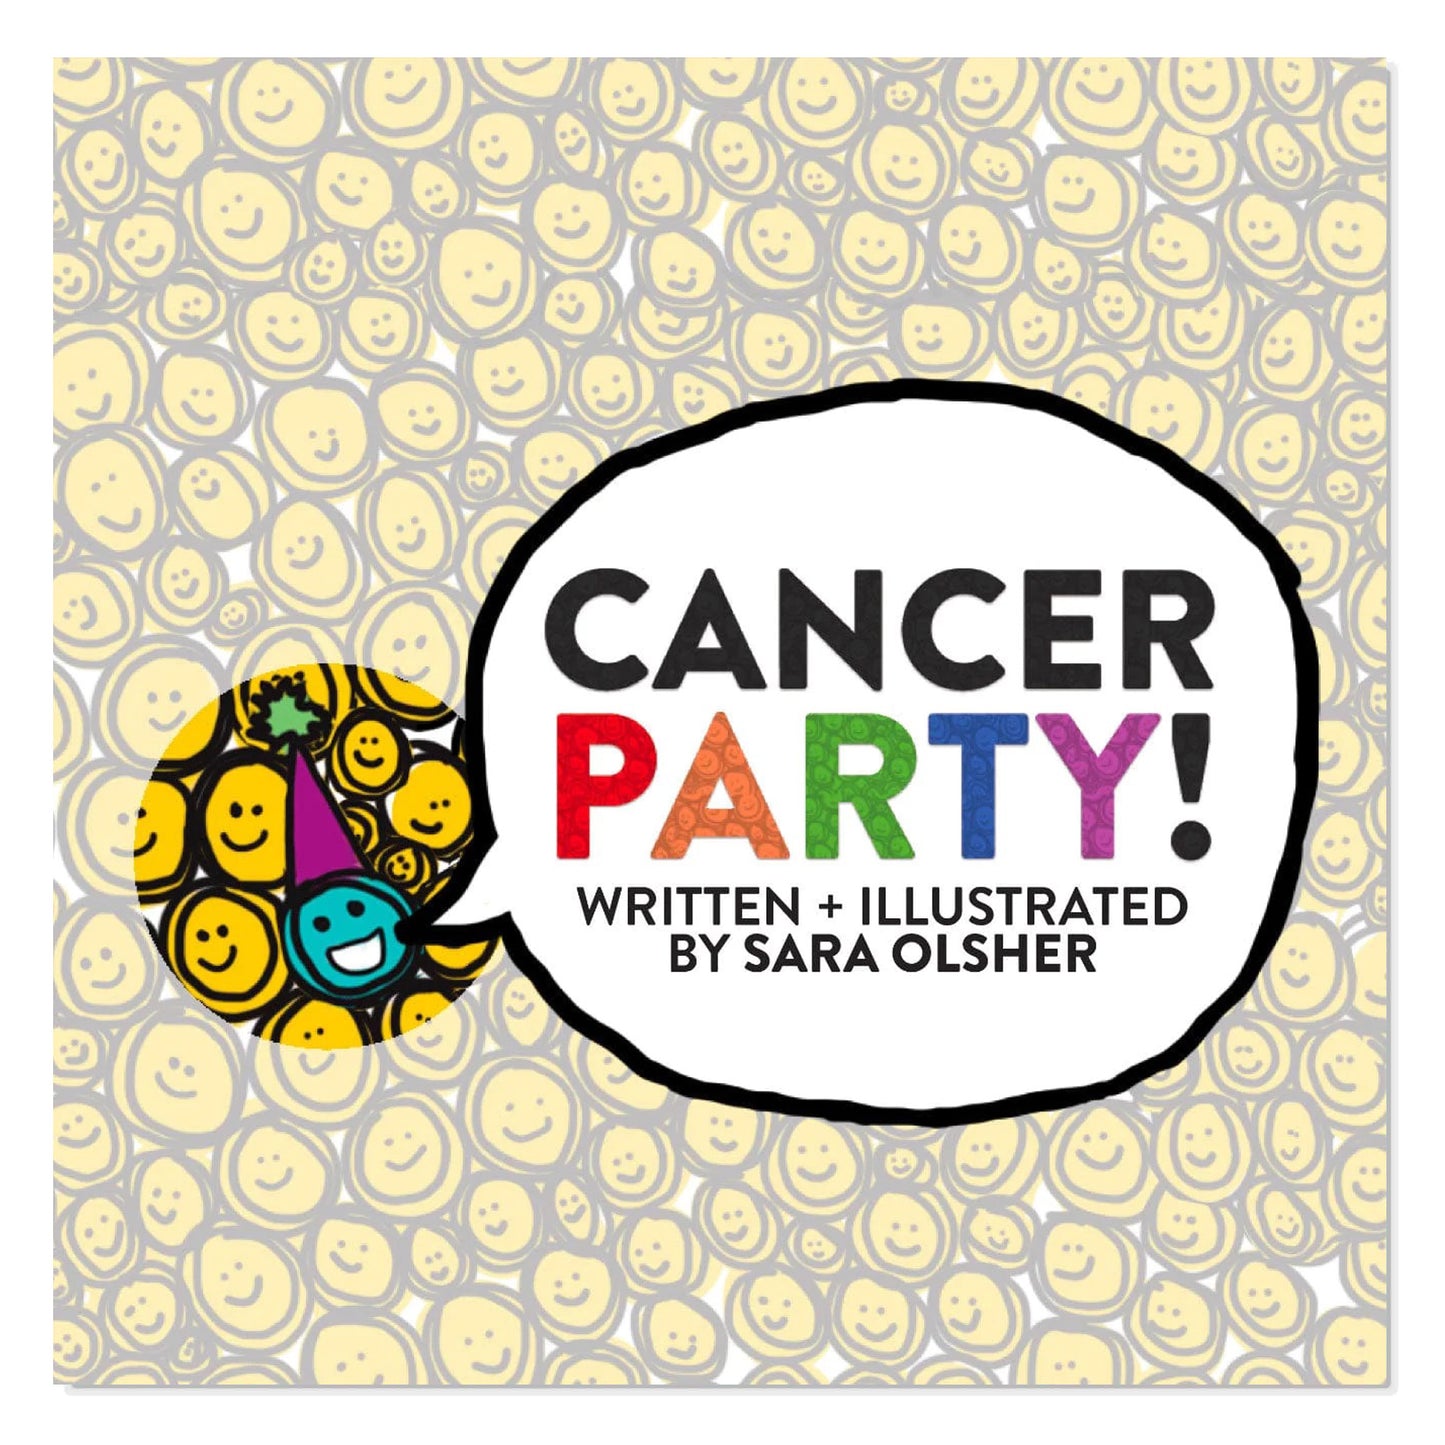 Cancer Party!